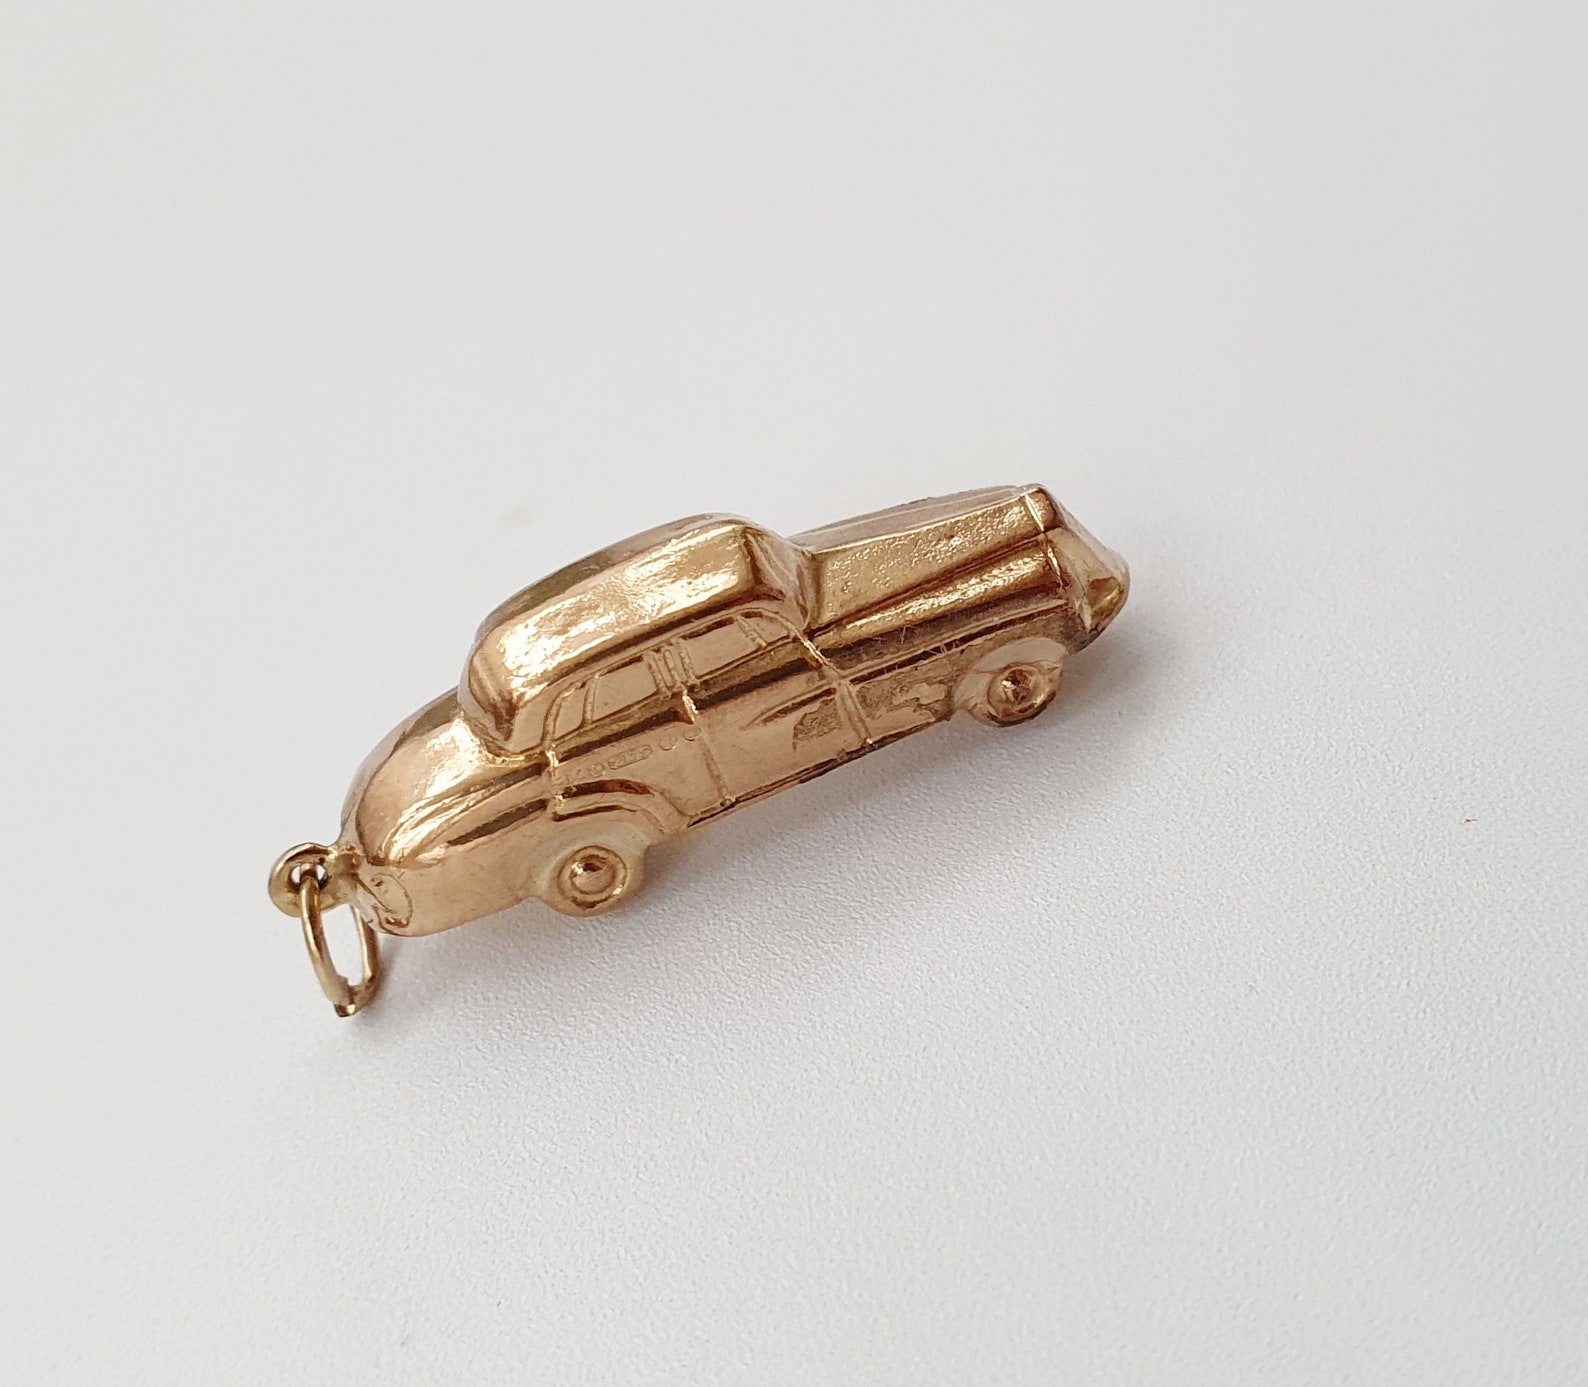 Vintage 9ct Gold Car Pendant / Charm. Hallmarked 1964. Quirky - Etsy